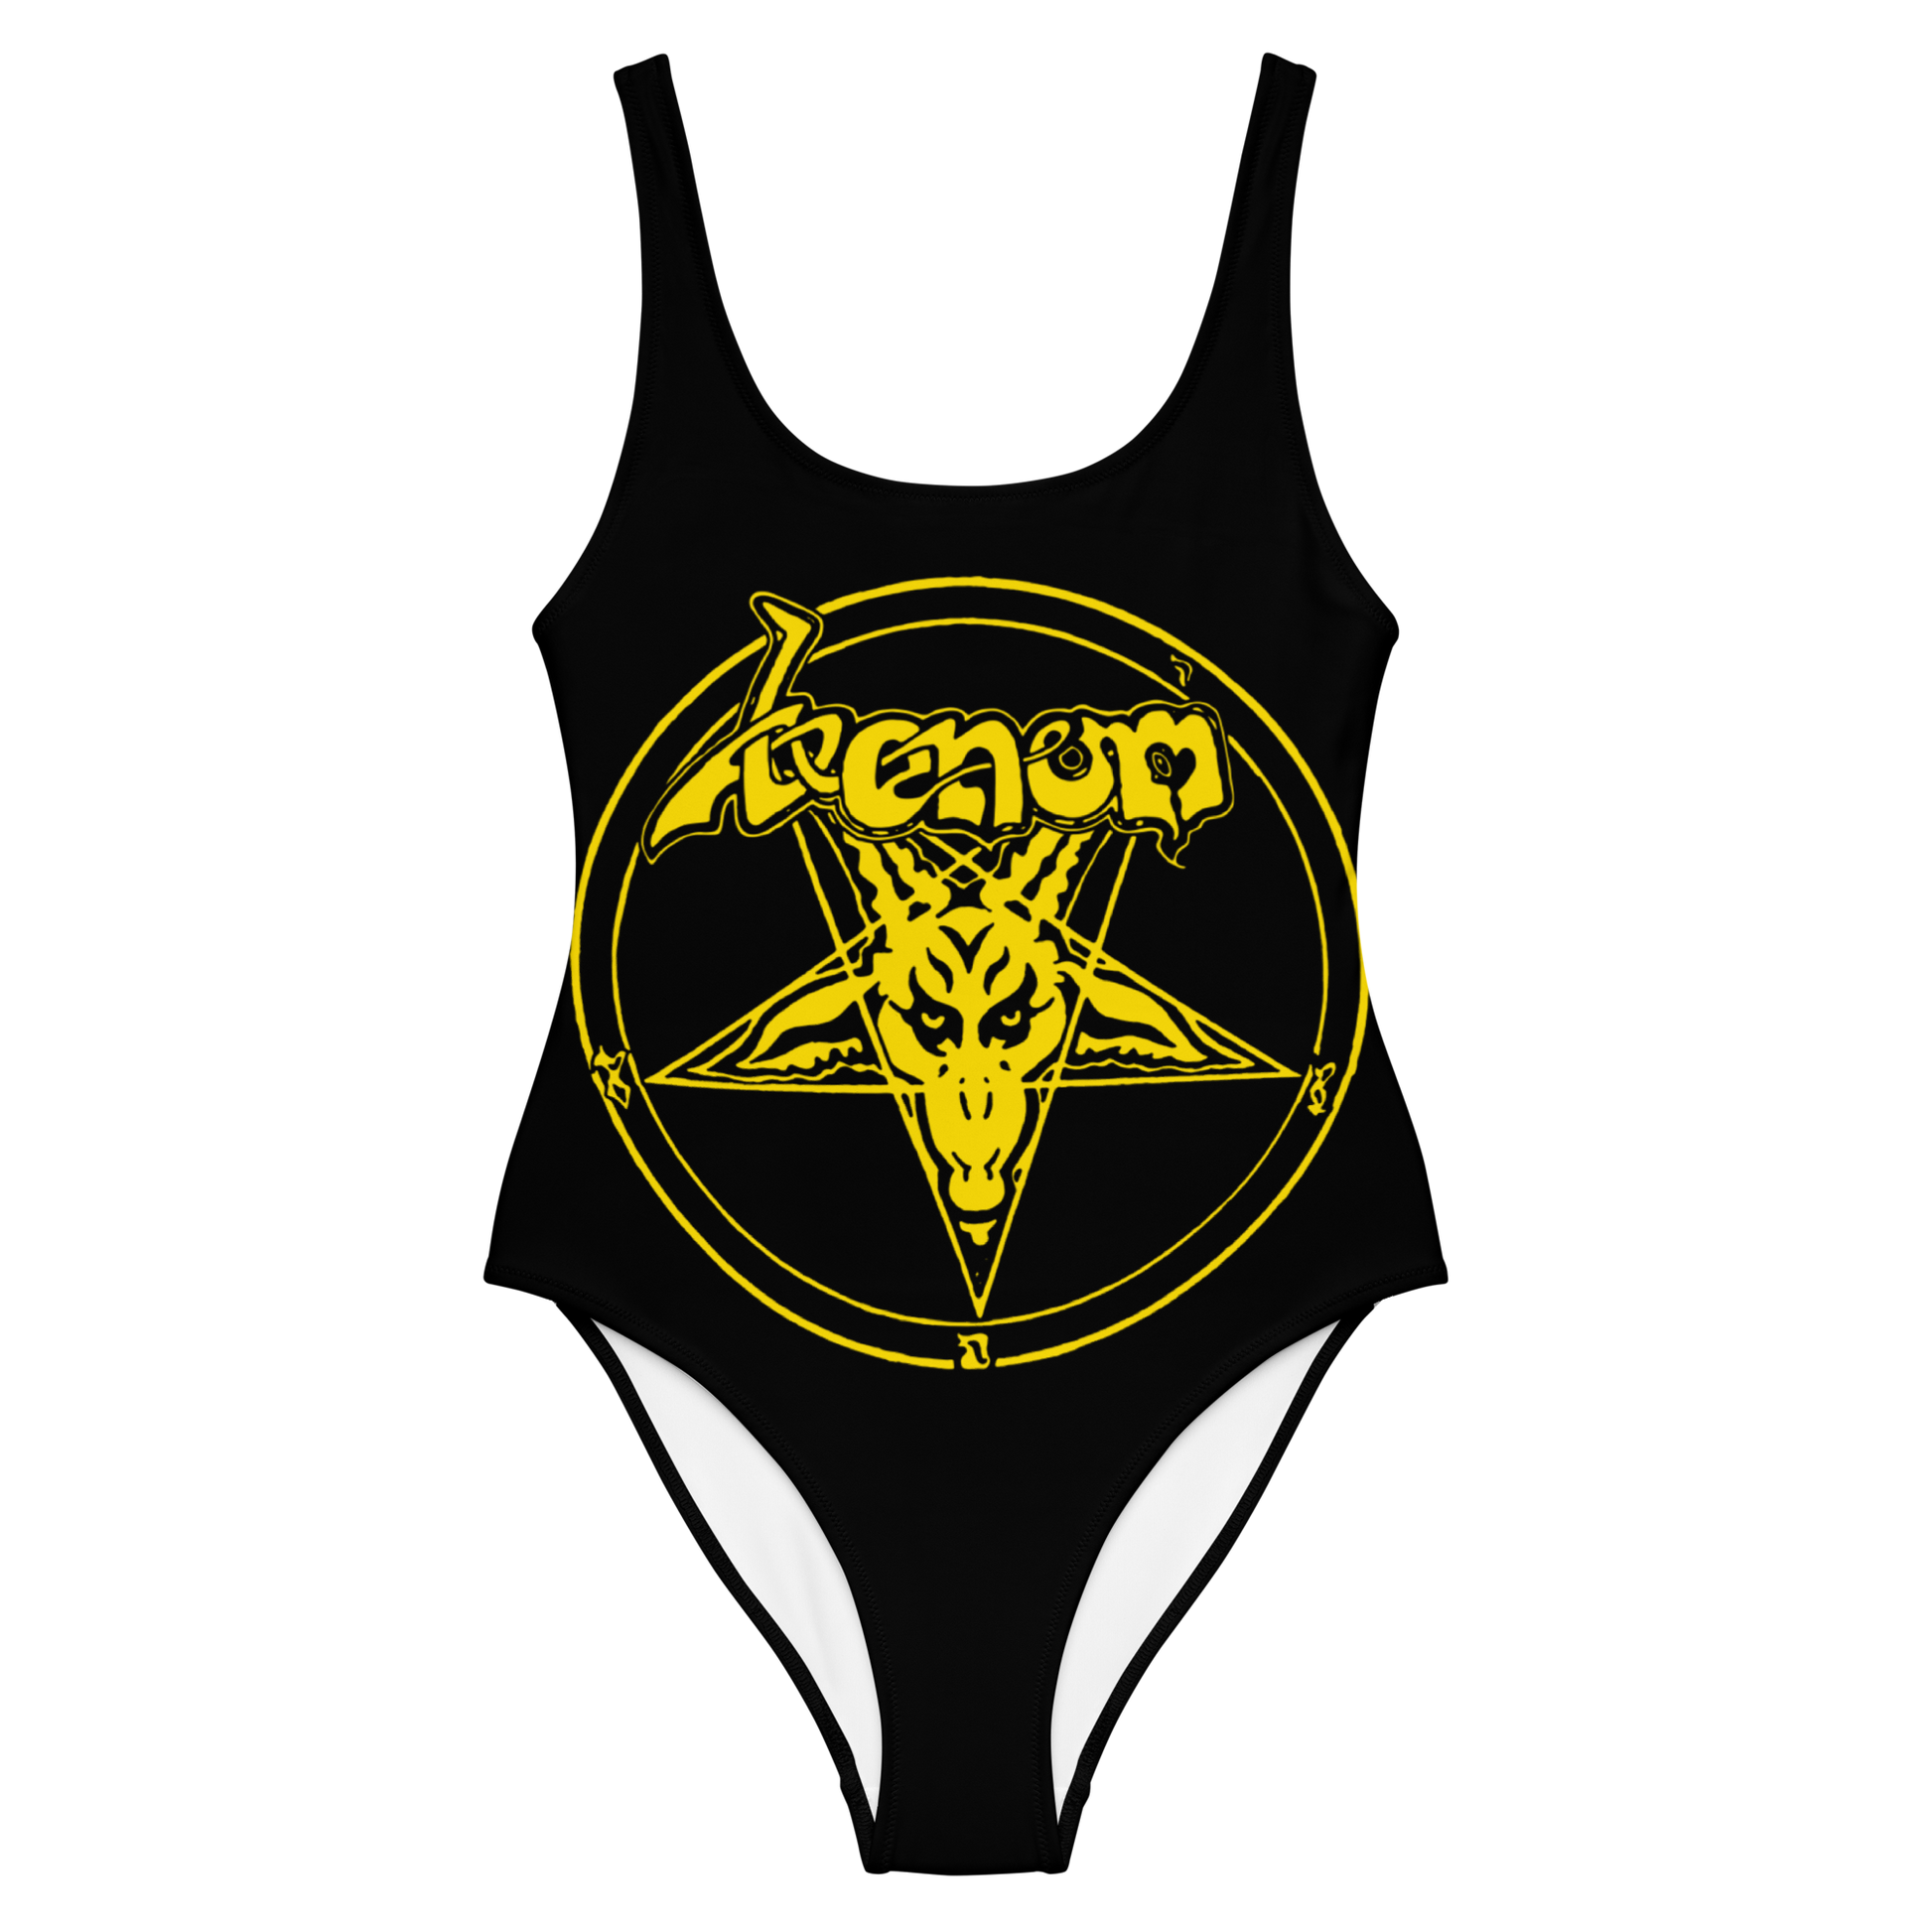 Venom Welcome to Hell official licensed bodysuit for swimming by Metal Mistress